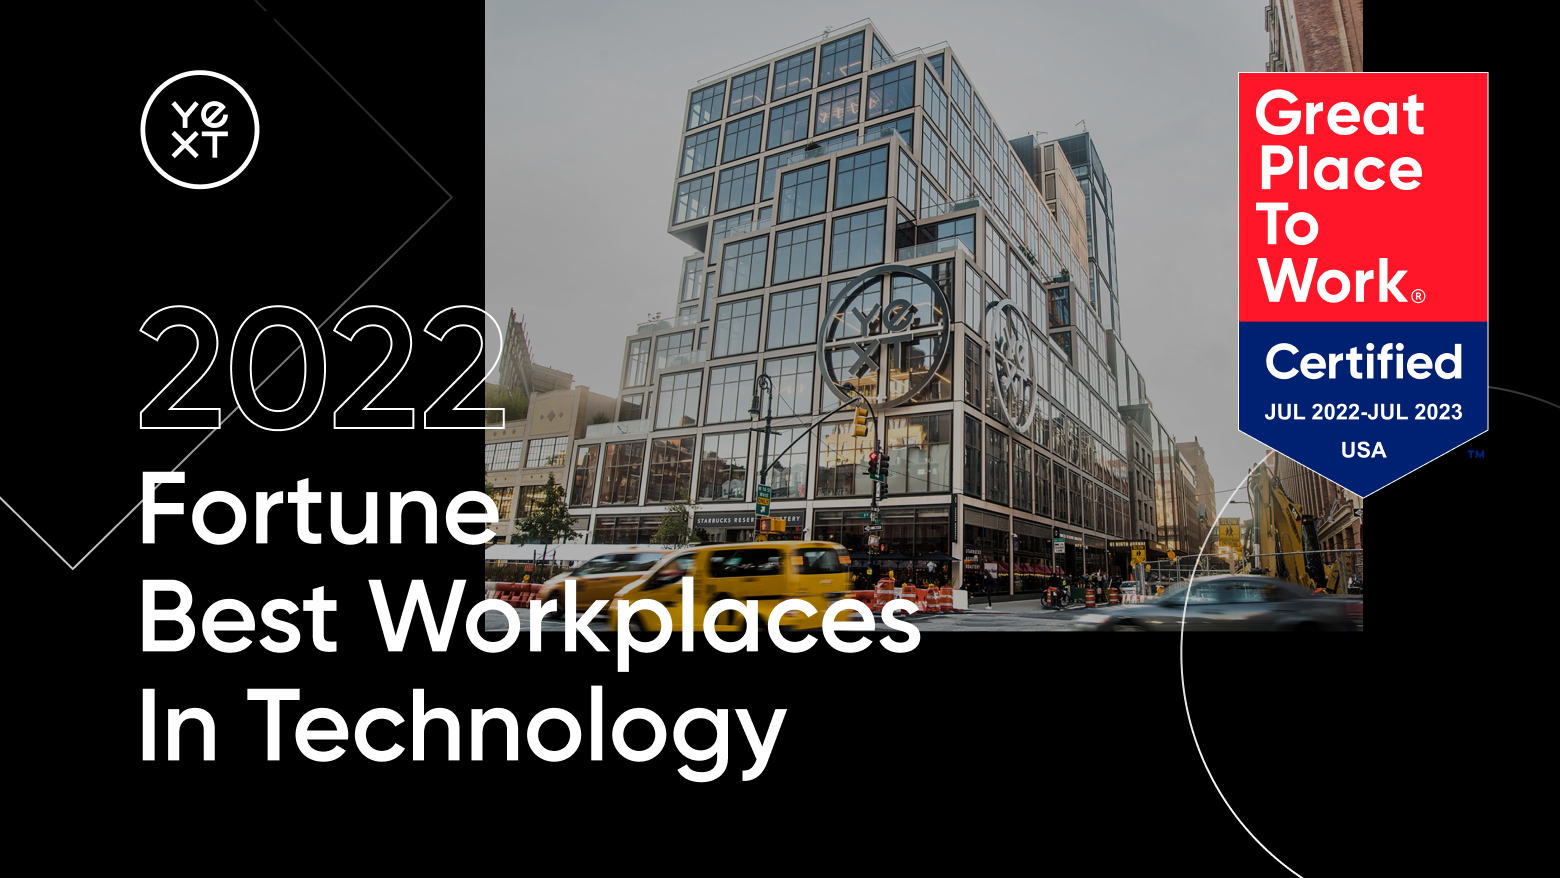 Yext Named One of the 2022 Best Workplaces in Technology™ by Great